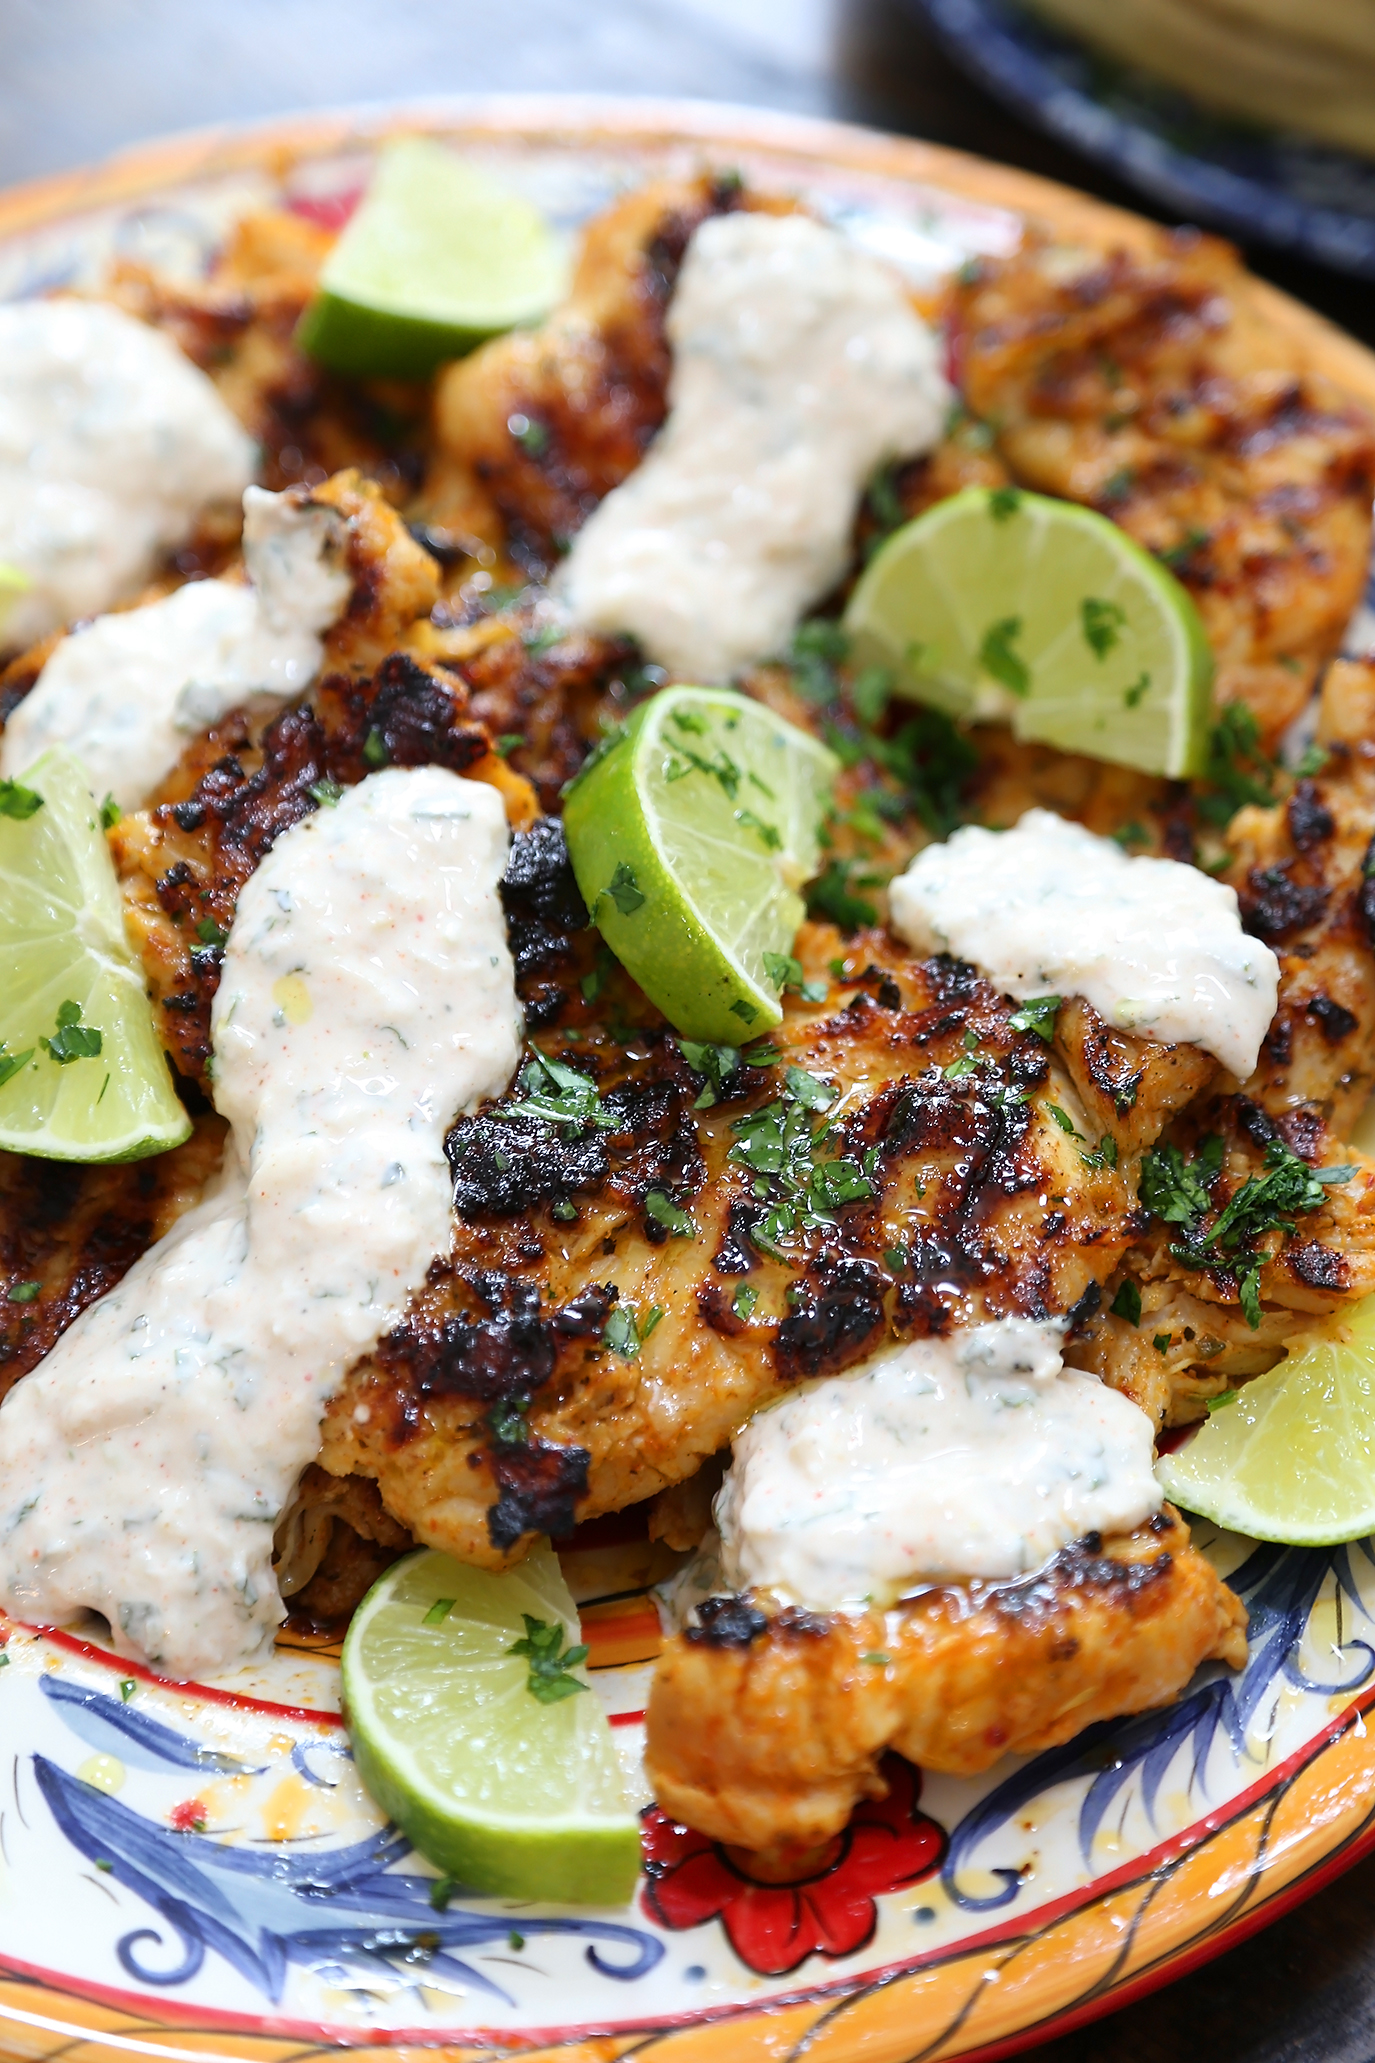 Chili-Lime Grilled Chicken with Cucumber-Mint Sauce - So delicious! Juicy grilled chicken with a cool, refreshing cucumber sauce made easy! thecomfortofcooking.com